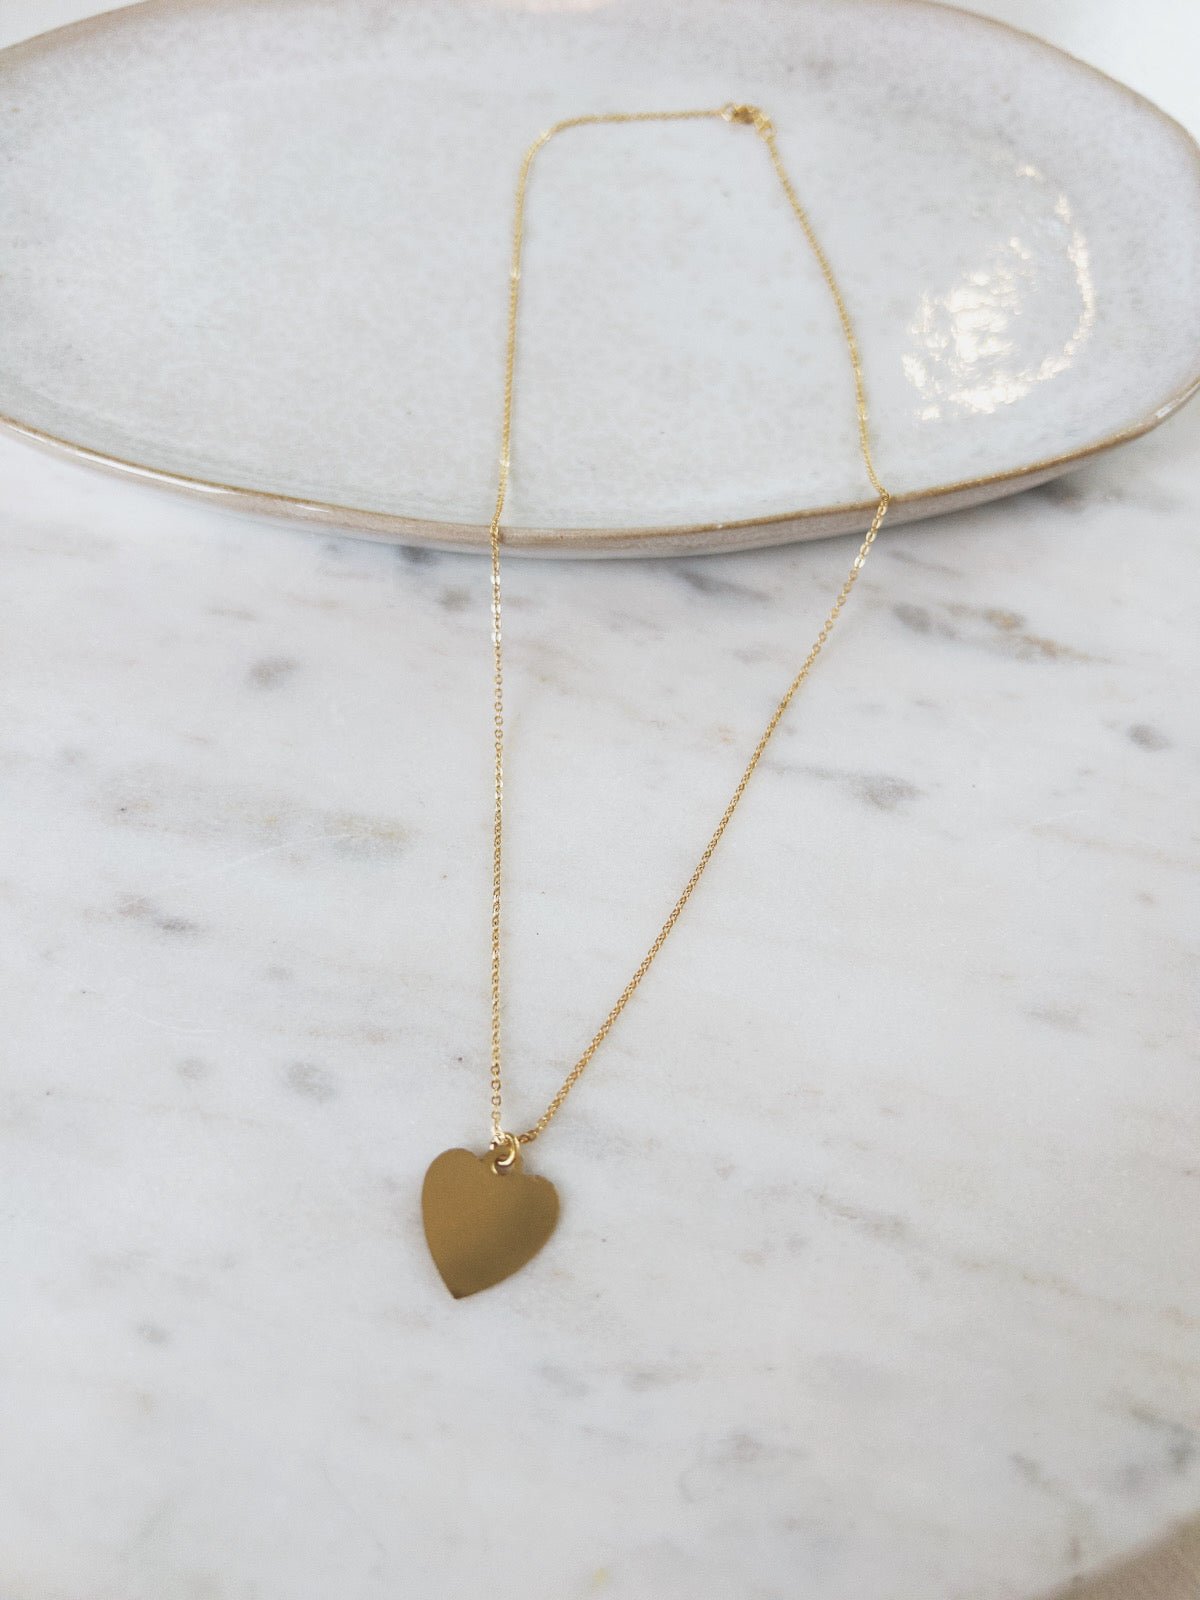 Heart Charm Necklace, Gold Filled - Spring Sweet